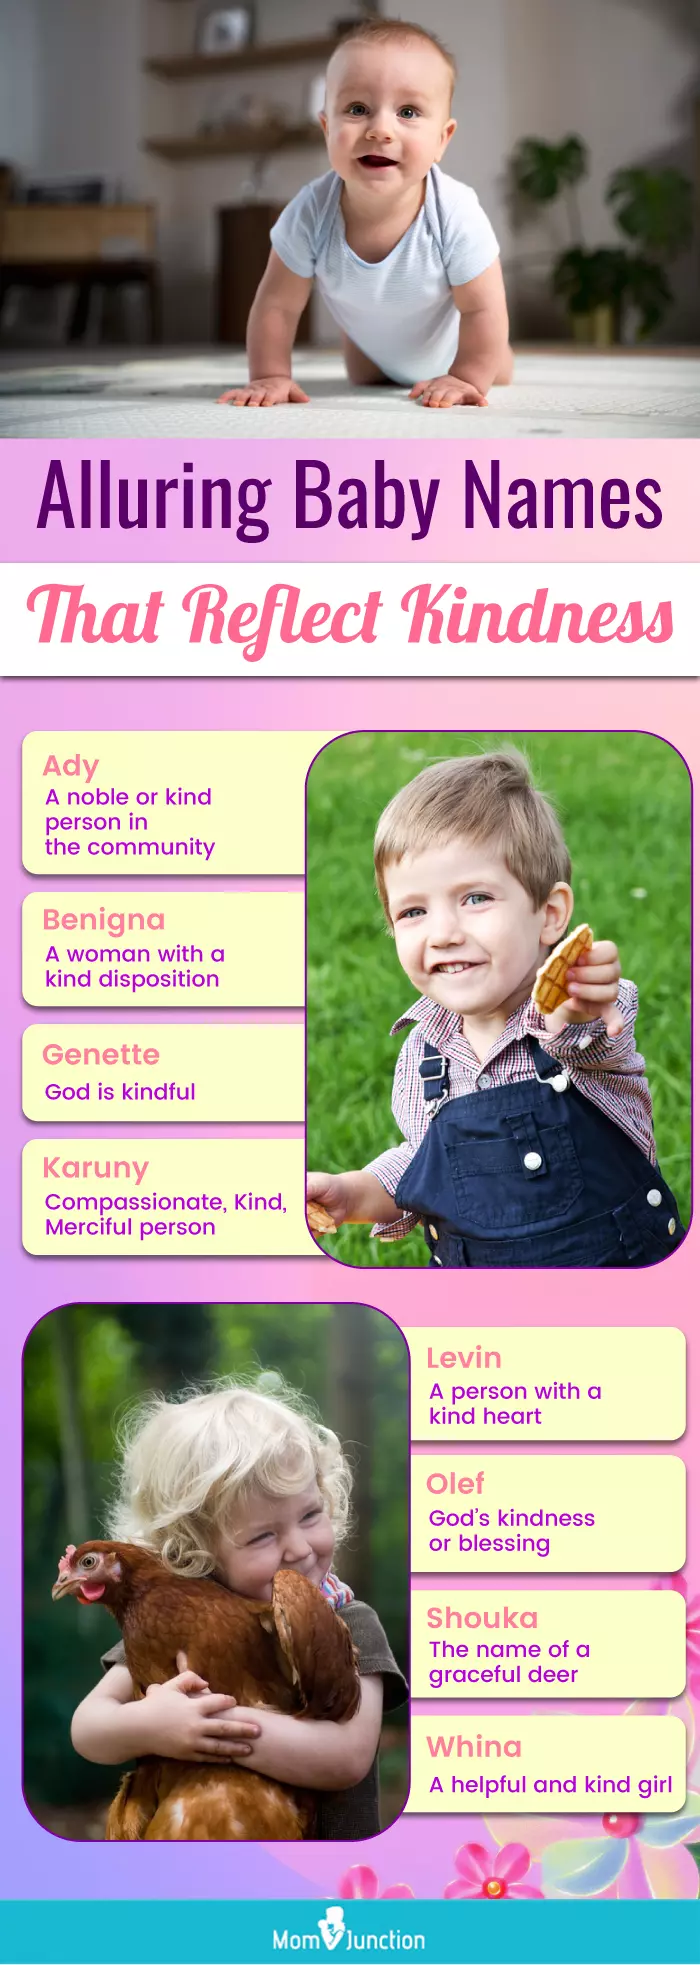 alluring baby names that reflect kindness (infographic)